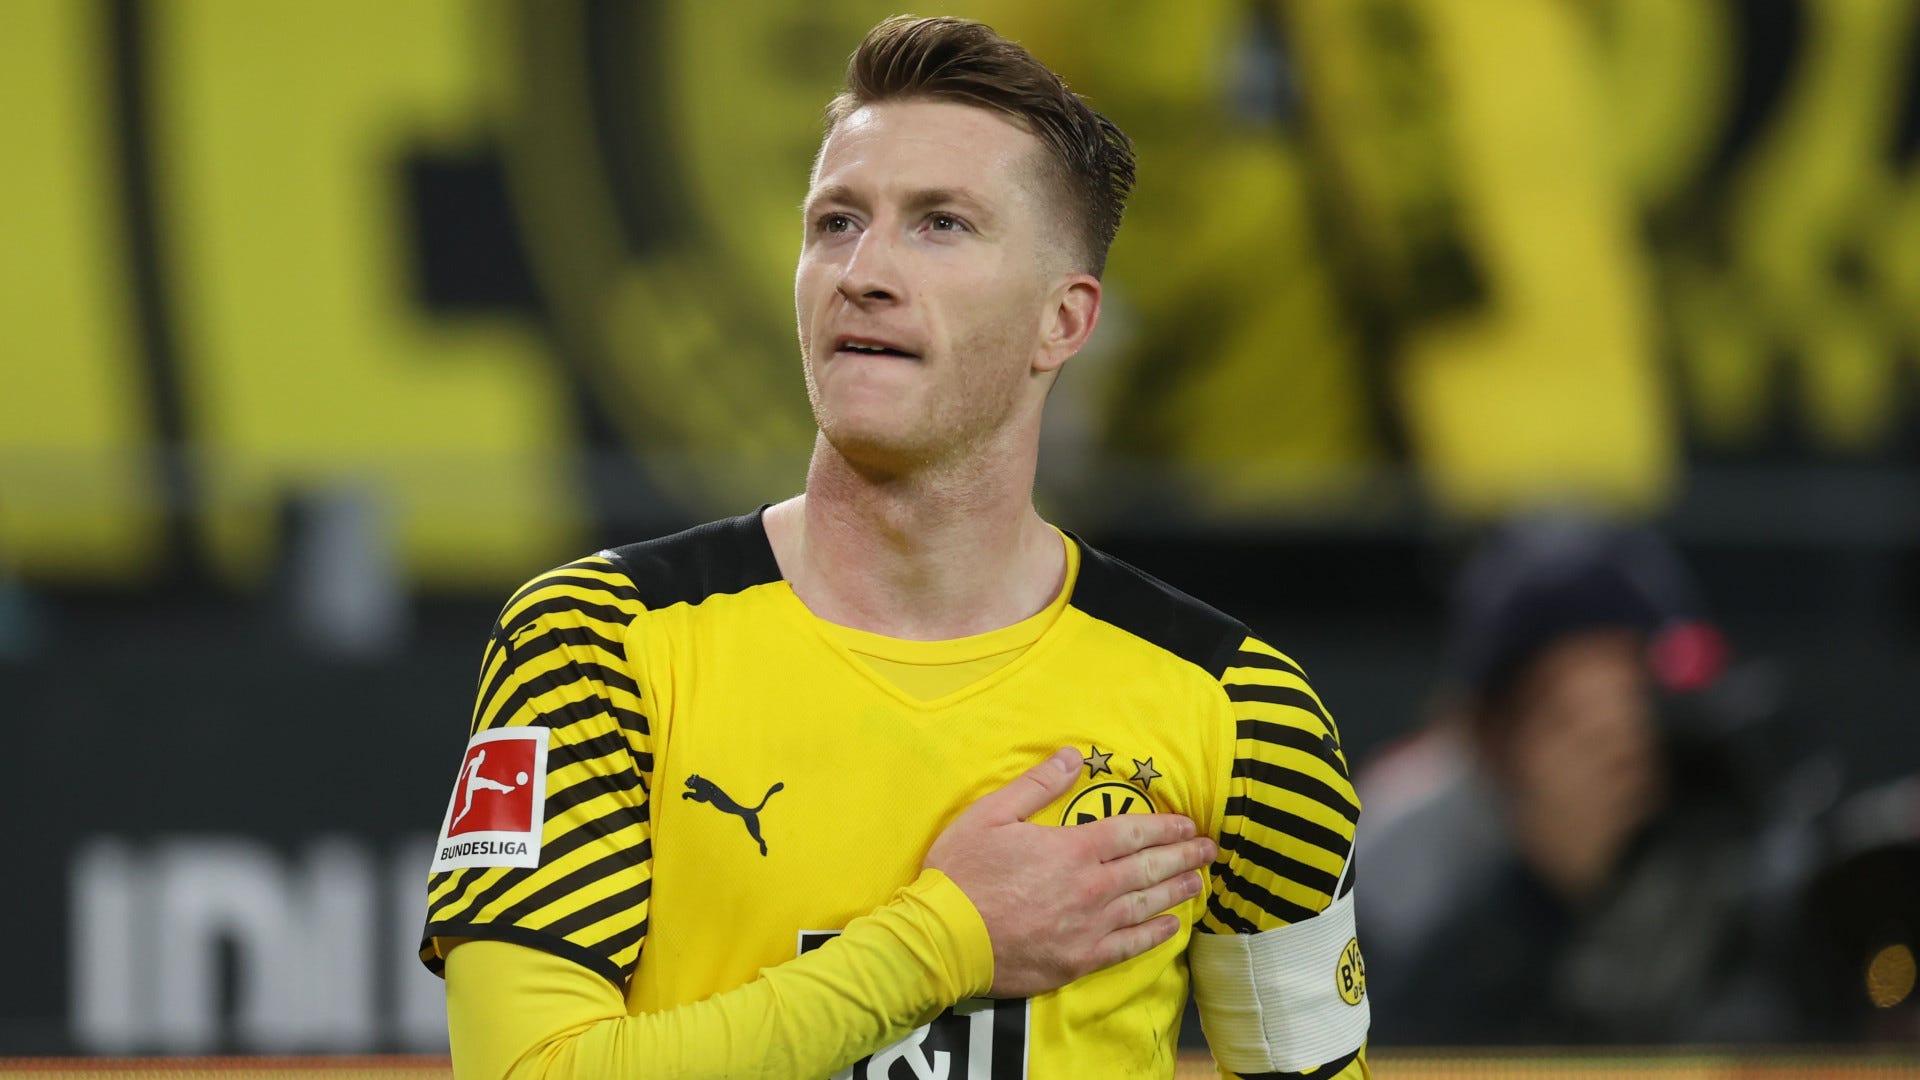 45 Coolest Soccer Player Haircuts | Marco reus haircut, Reus hairstyle,  Celebrity hairstyles